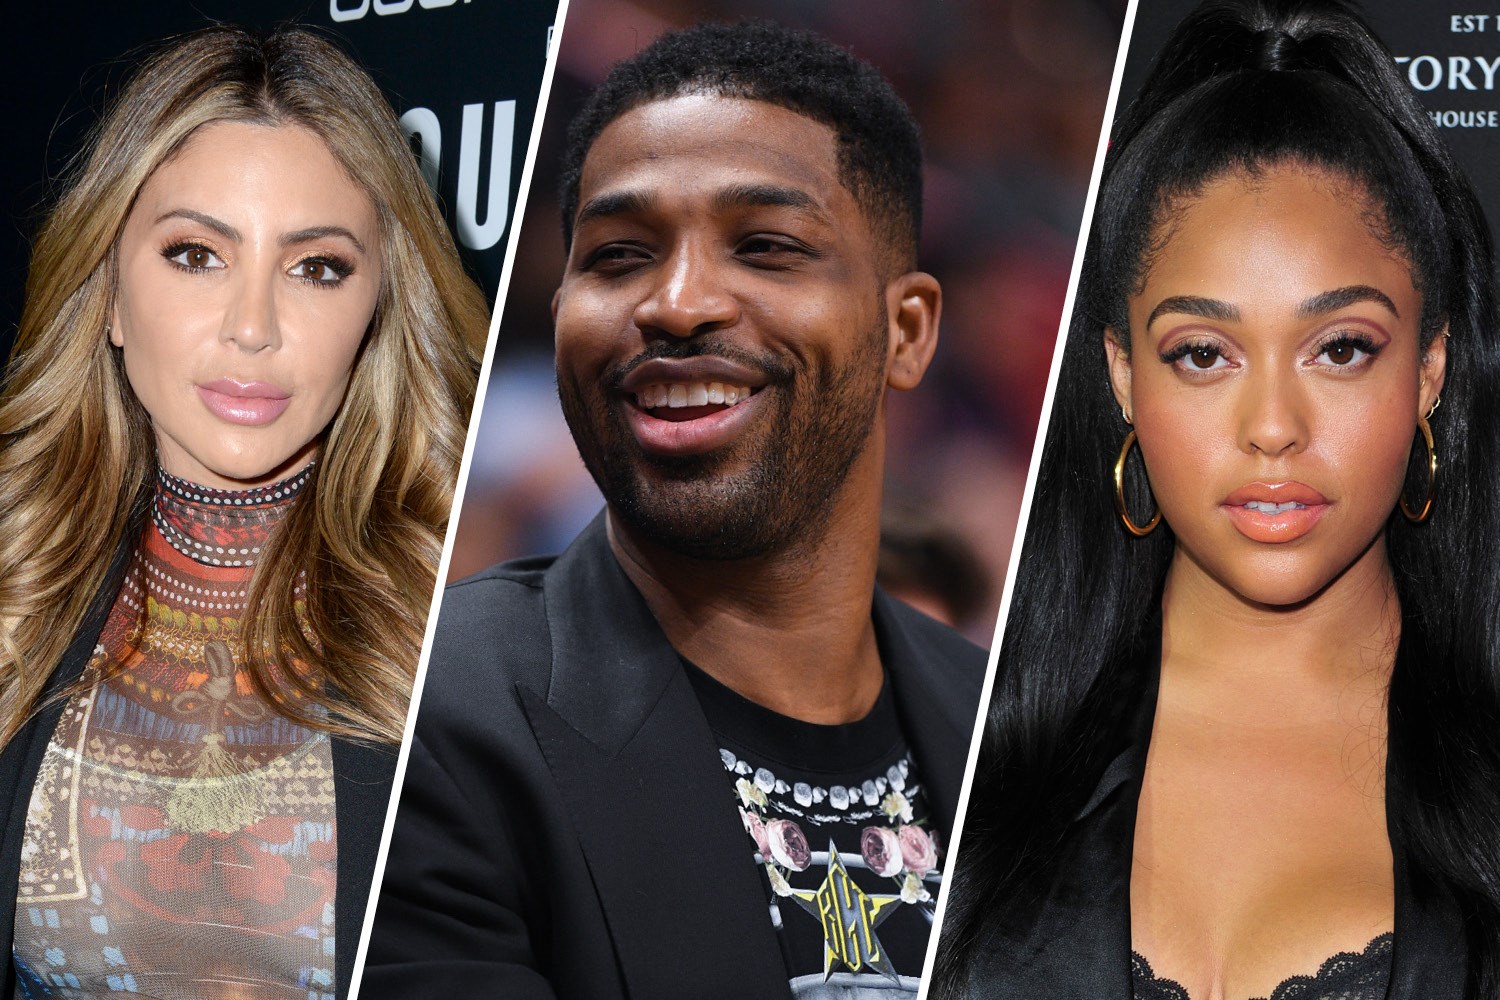 Larsa Pippen Claims There Were ‘Situations’ With Jordyn Woods And Tristan Thompson